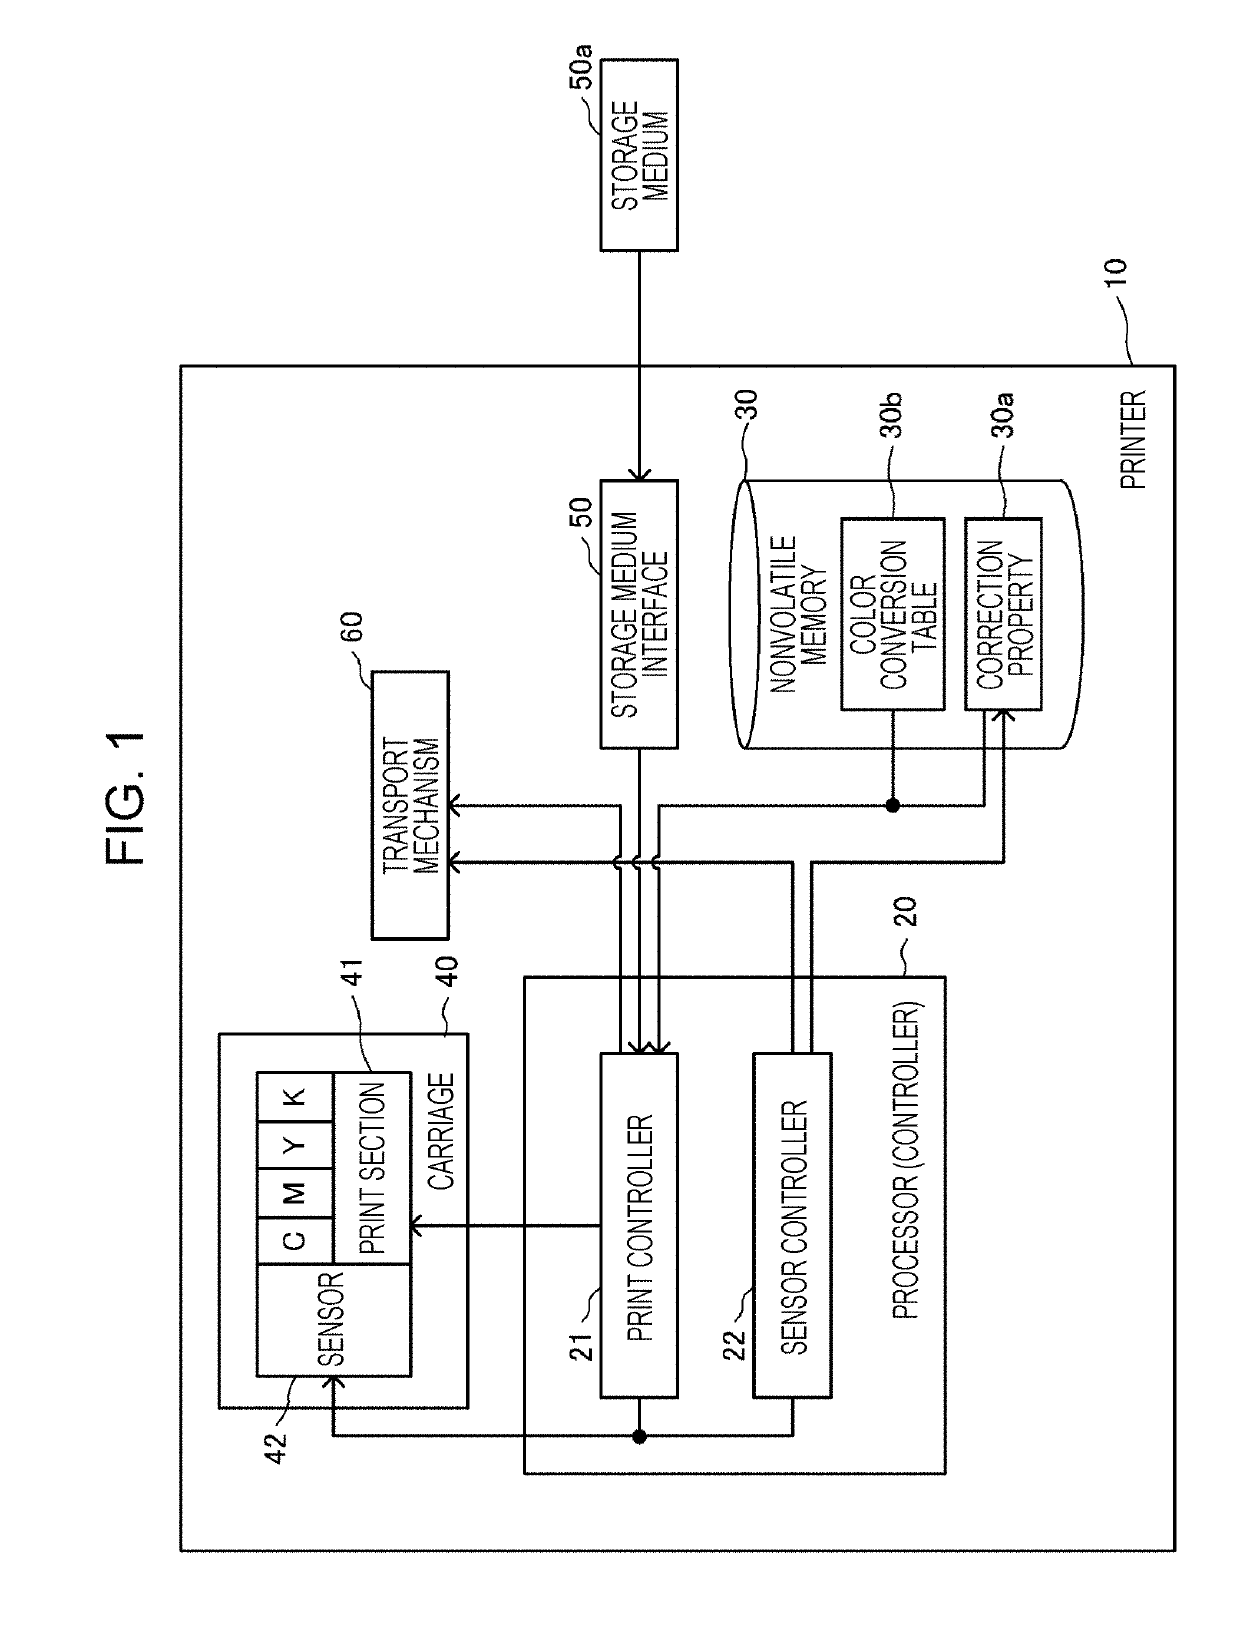 Image processing device, non-transitory computer-readable computer medium storing image processing program, and method of generating readout data